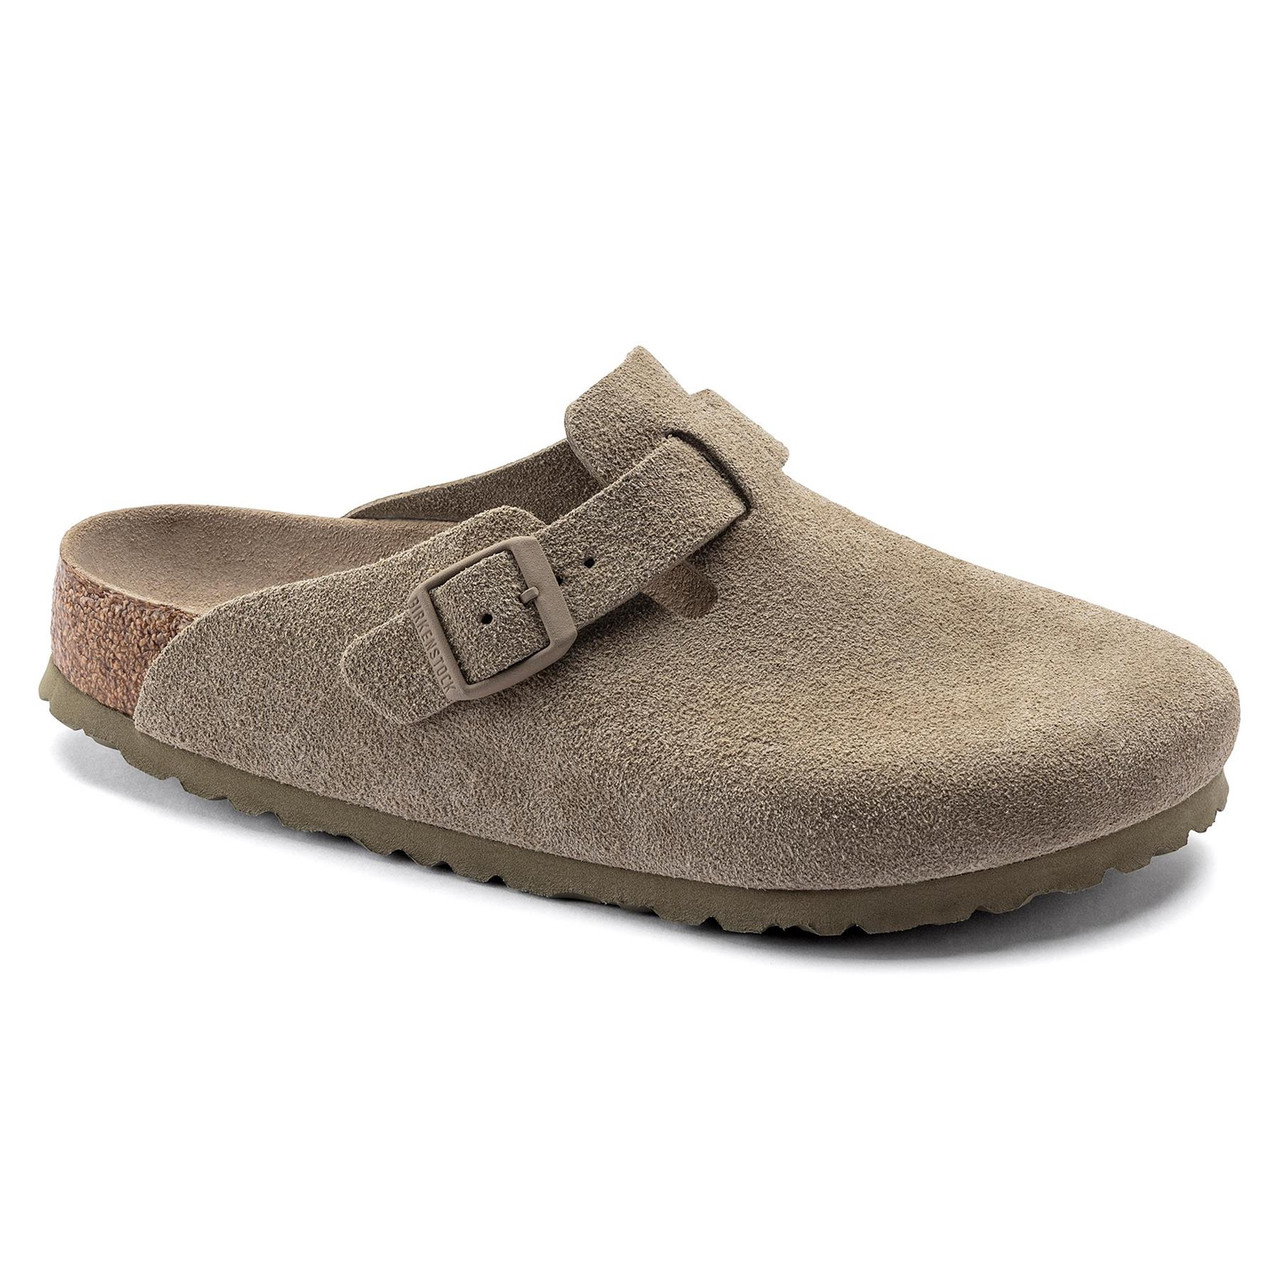 What is the outsole of the Birkenstock Unisex Boston Soft Footbed Suede Leather Clog?